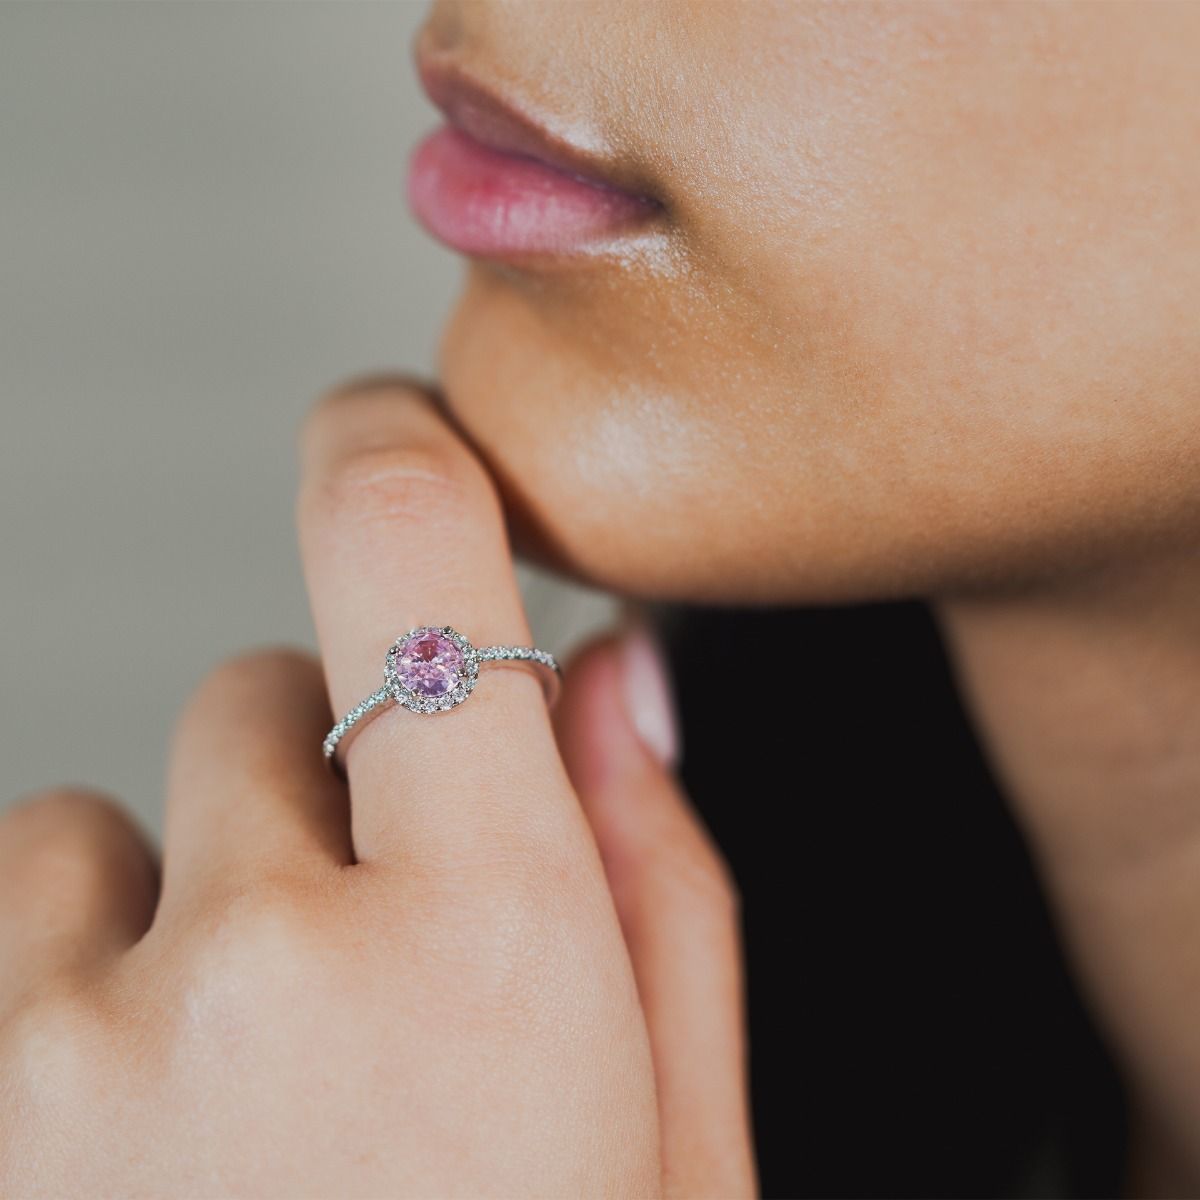 Make a statement with this stunning brilliant cut dazzling pink ring. Delicately surrounded with a halo of sparkling cubic zirconia stones surrounding the centre stone and down the band, creating a dramatic, elegant look.